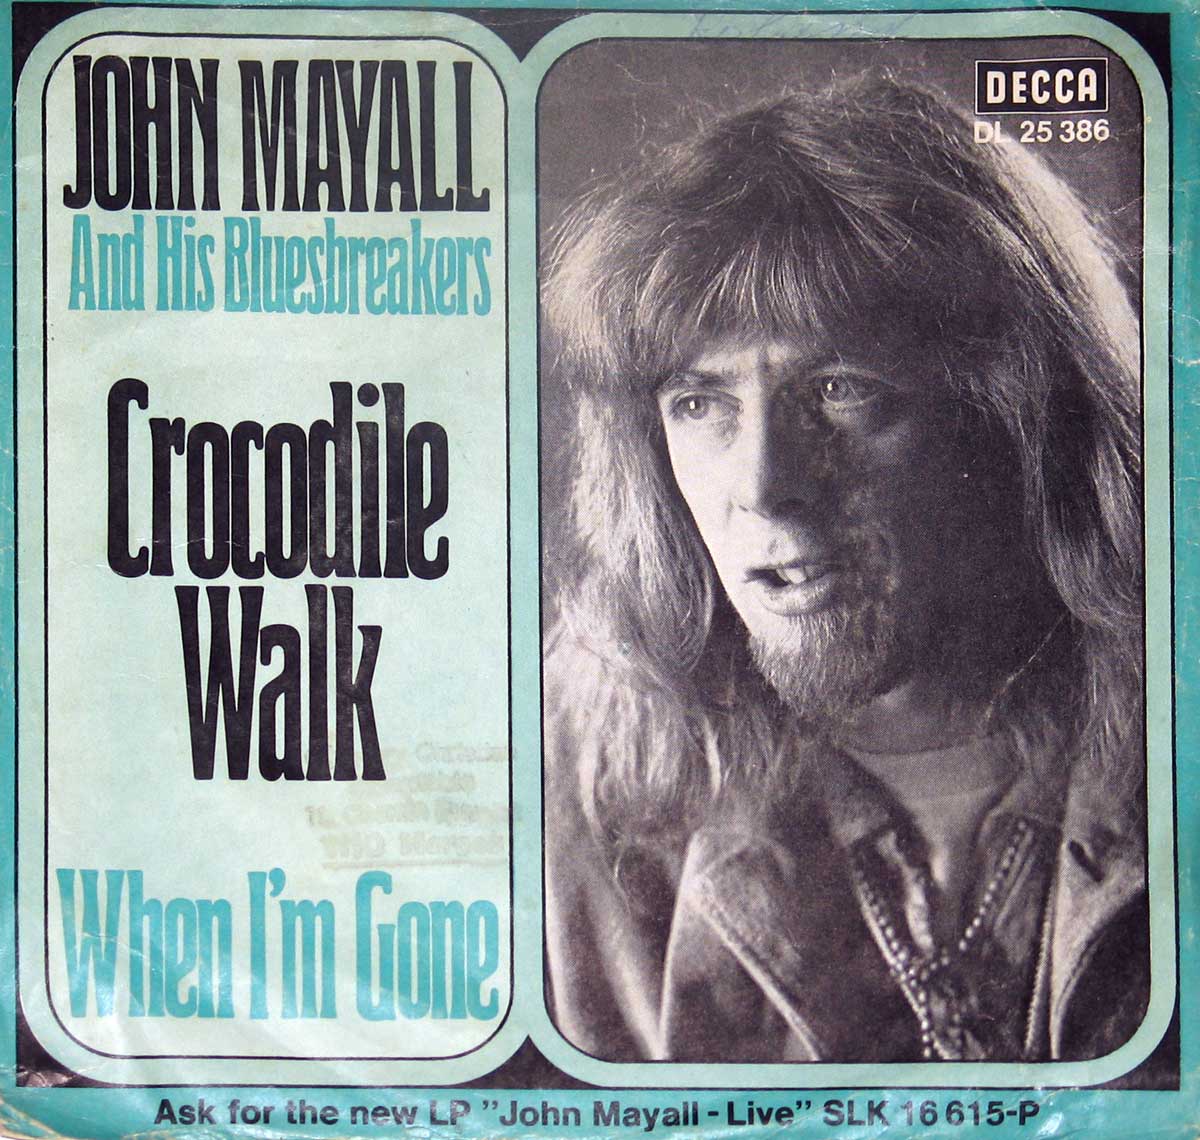 Album Front Cover Photo of John Mayall And His Bluesbreakers Crocodile Walk / When I'm Gone 